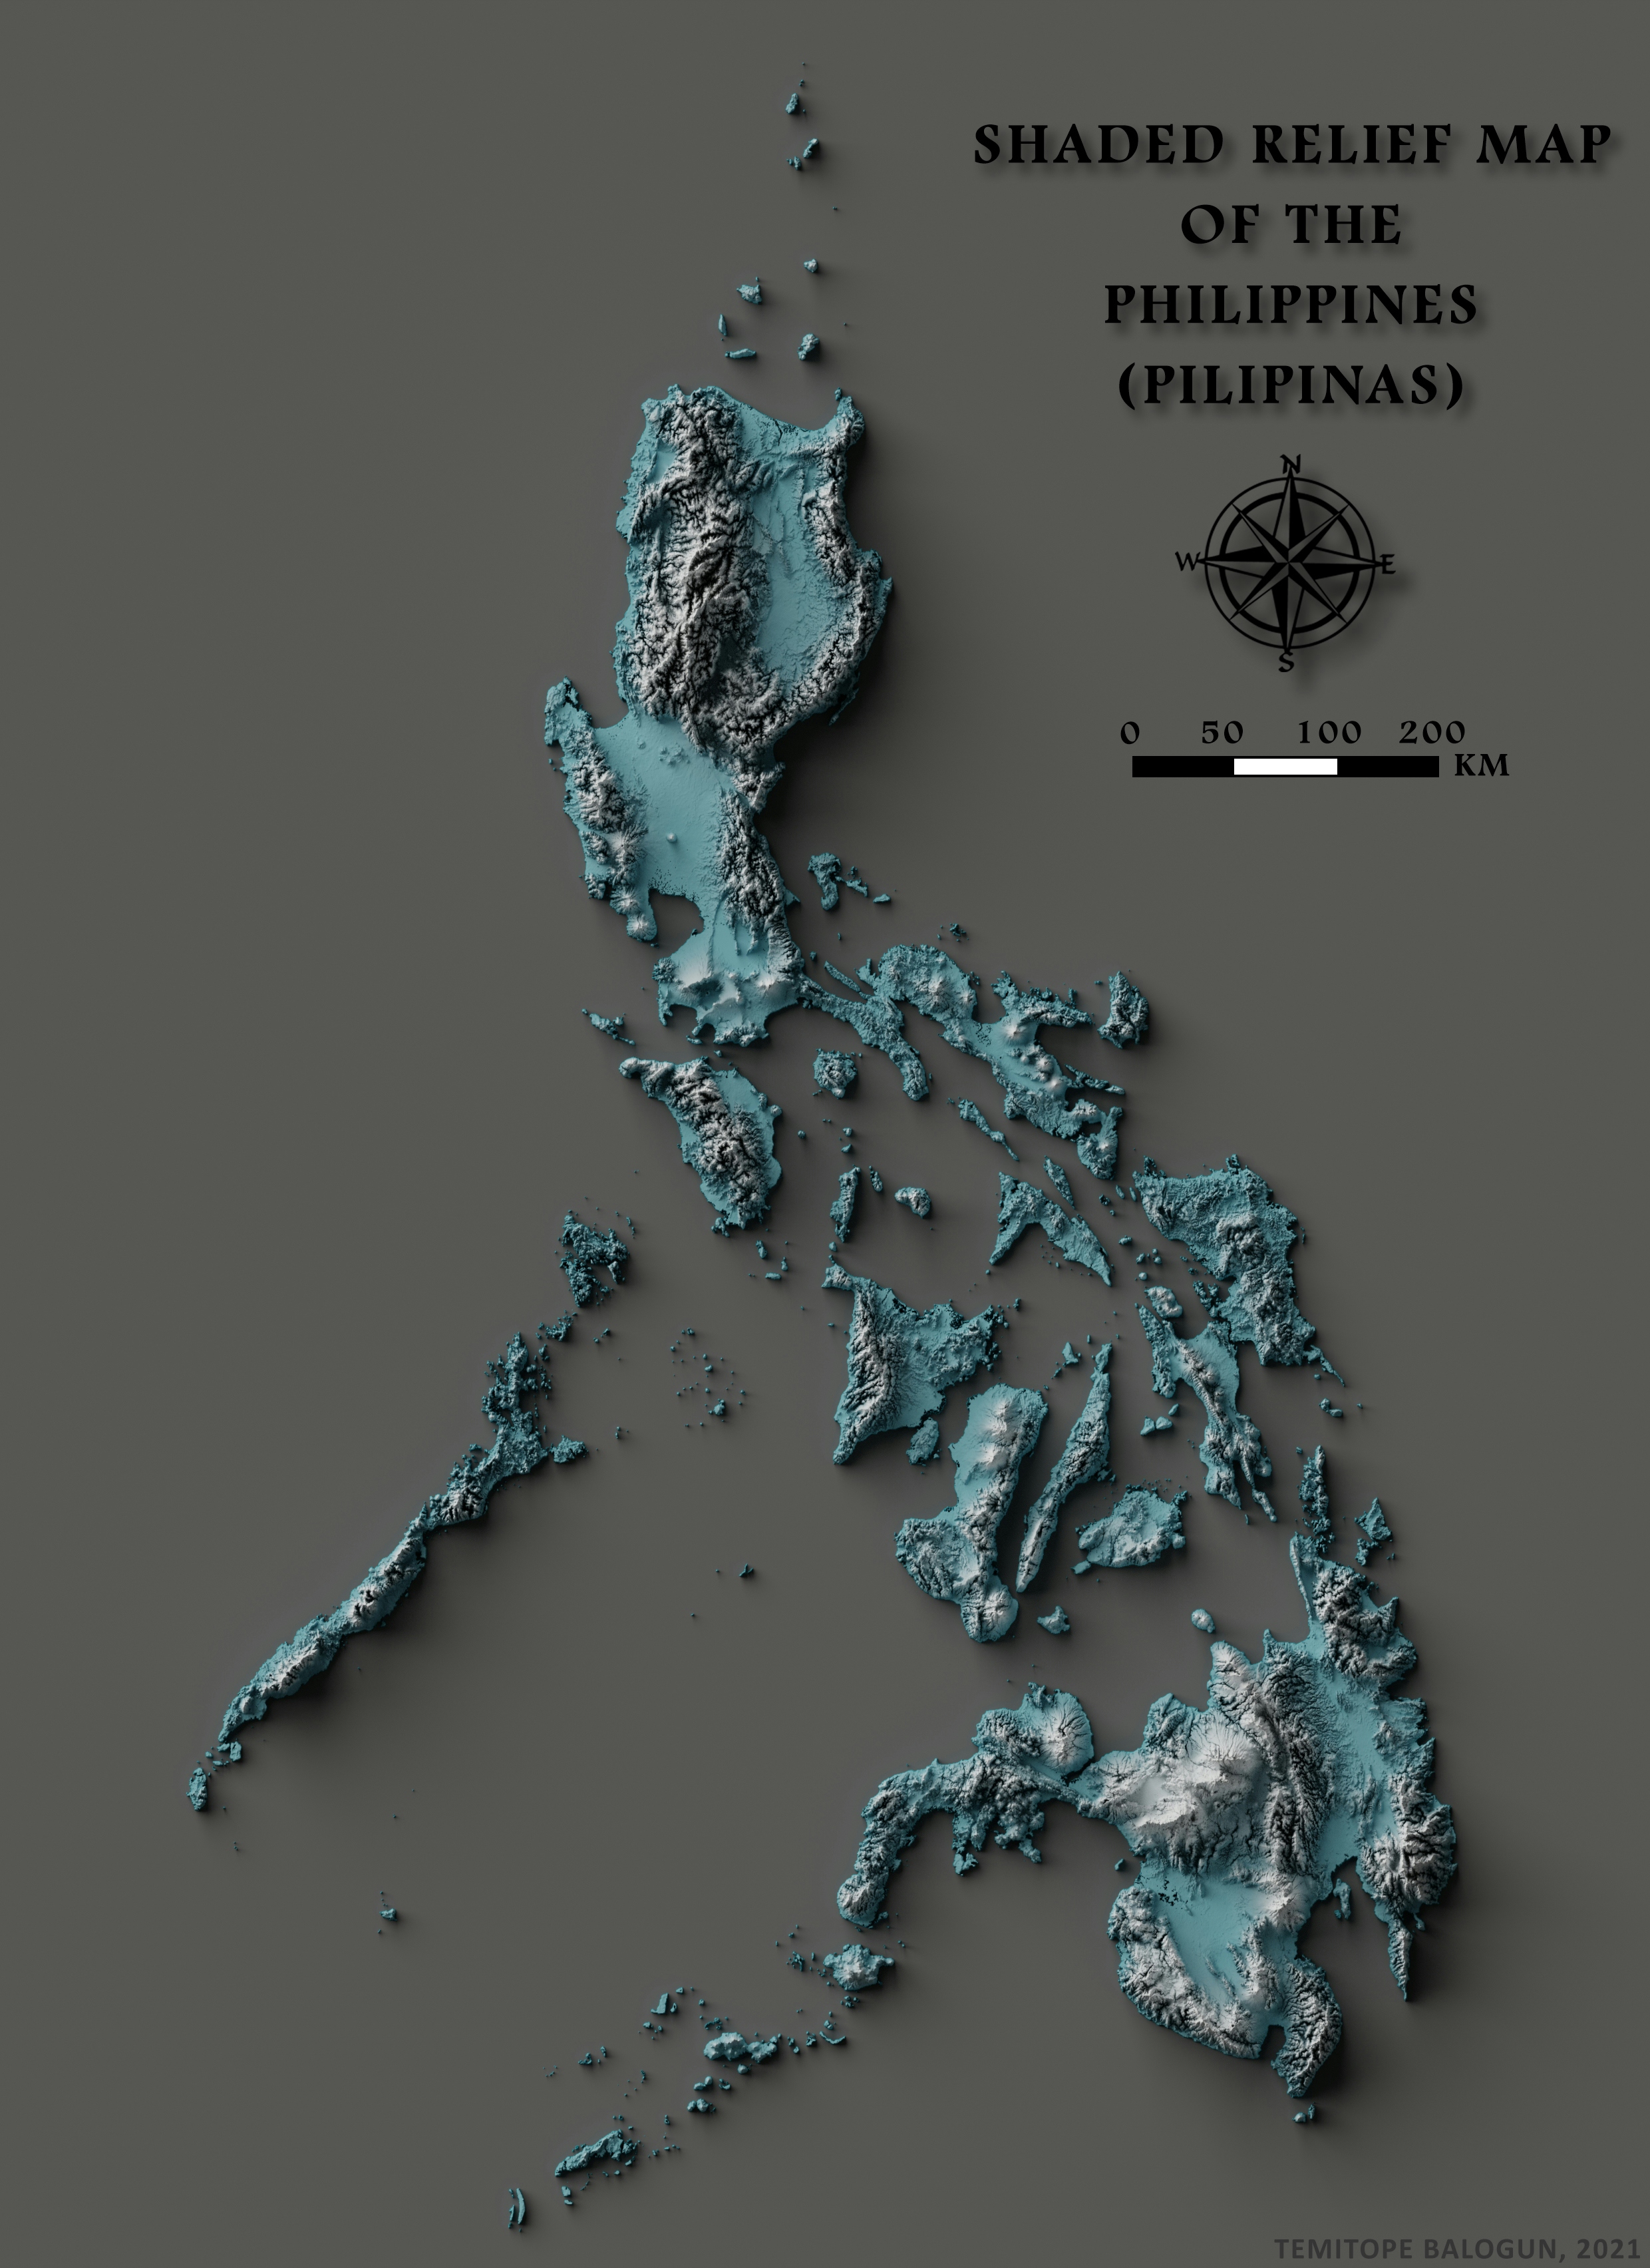 Shaded relief map of the Philippines